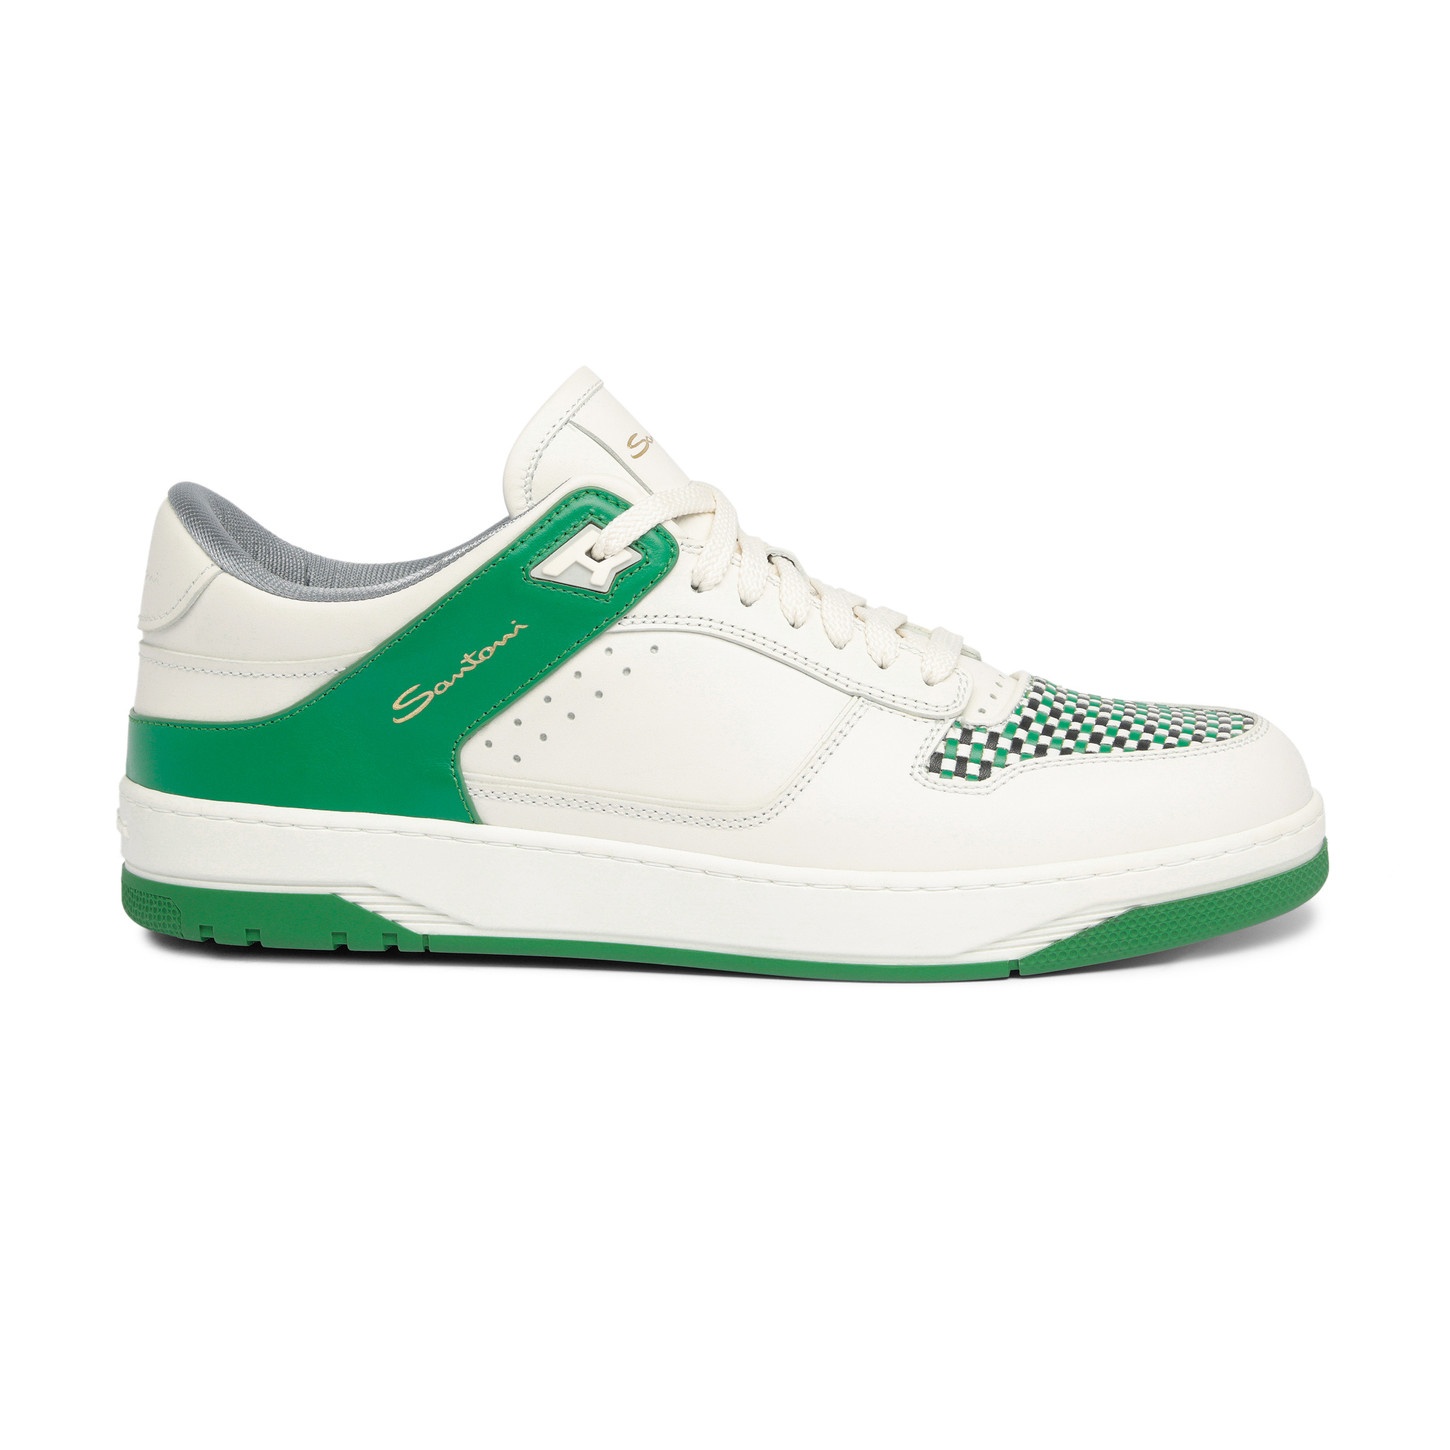 Men's white and green leather Sneak-Air sneaker - 1